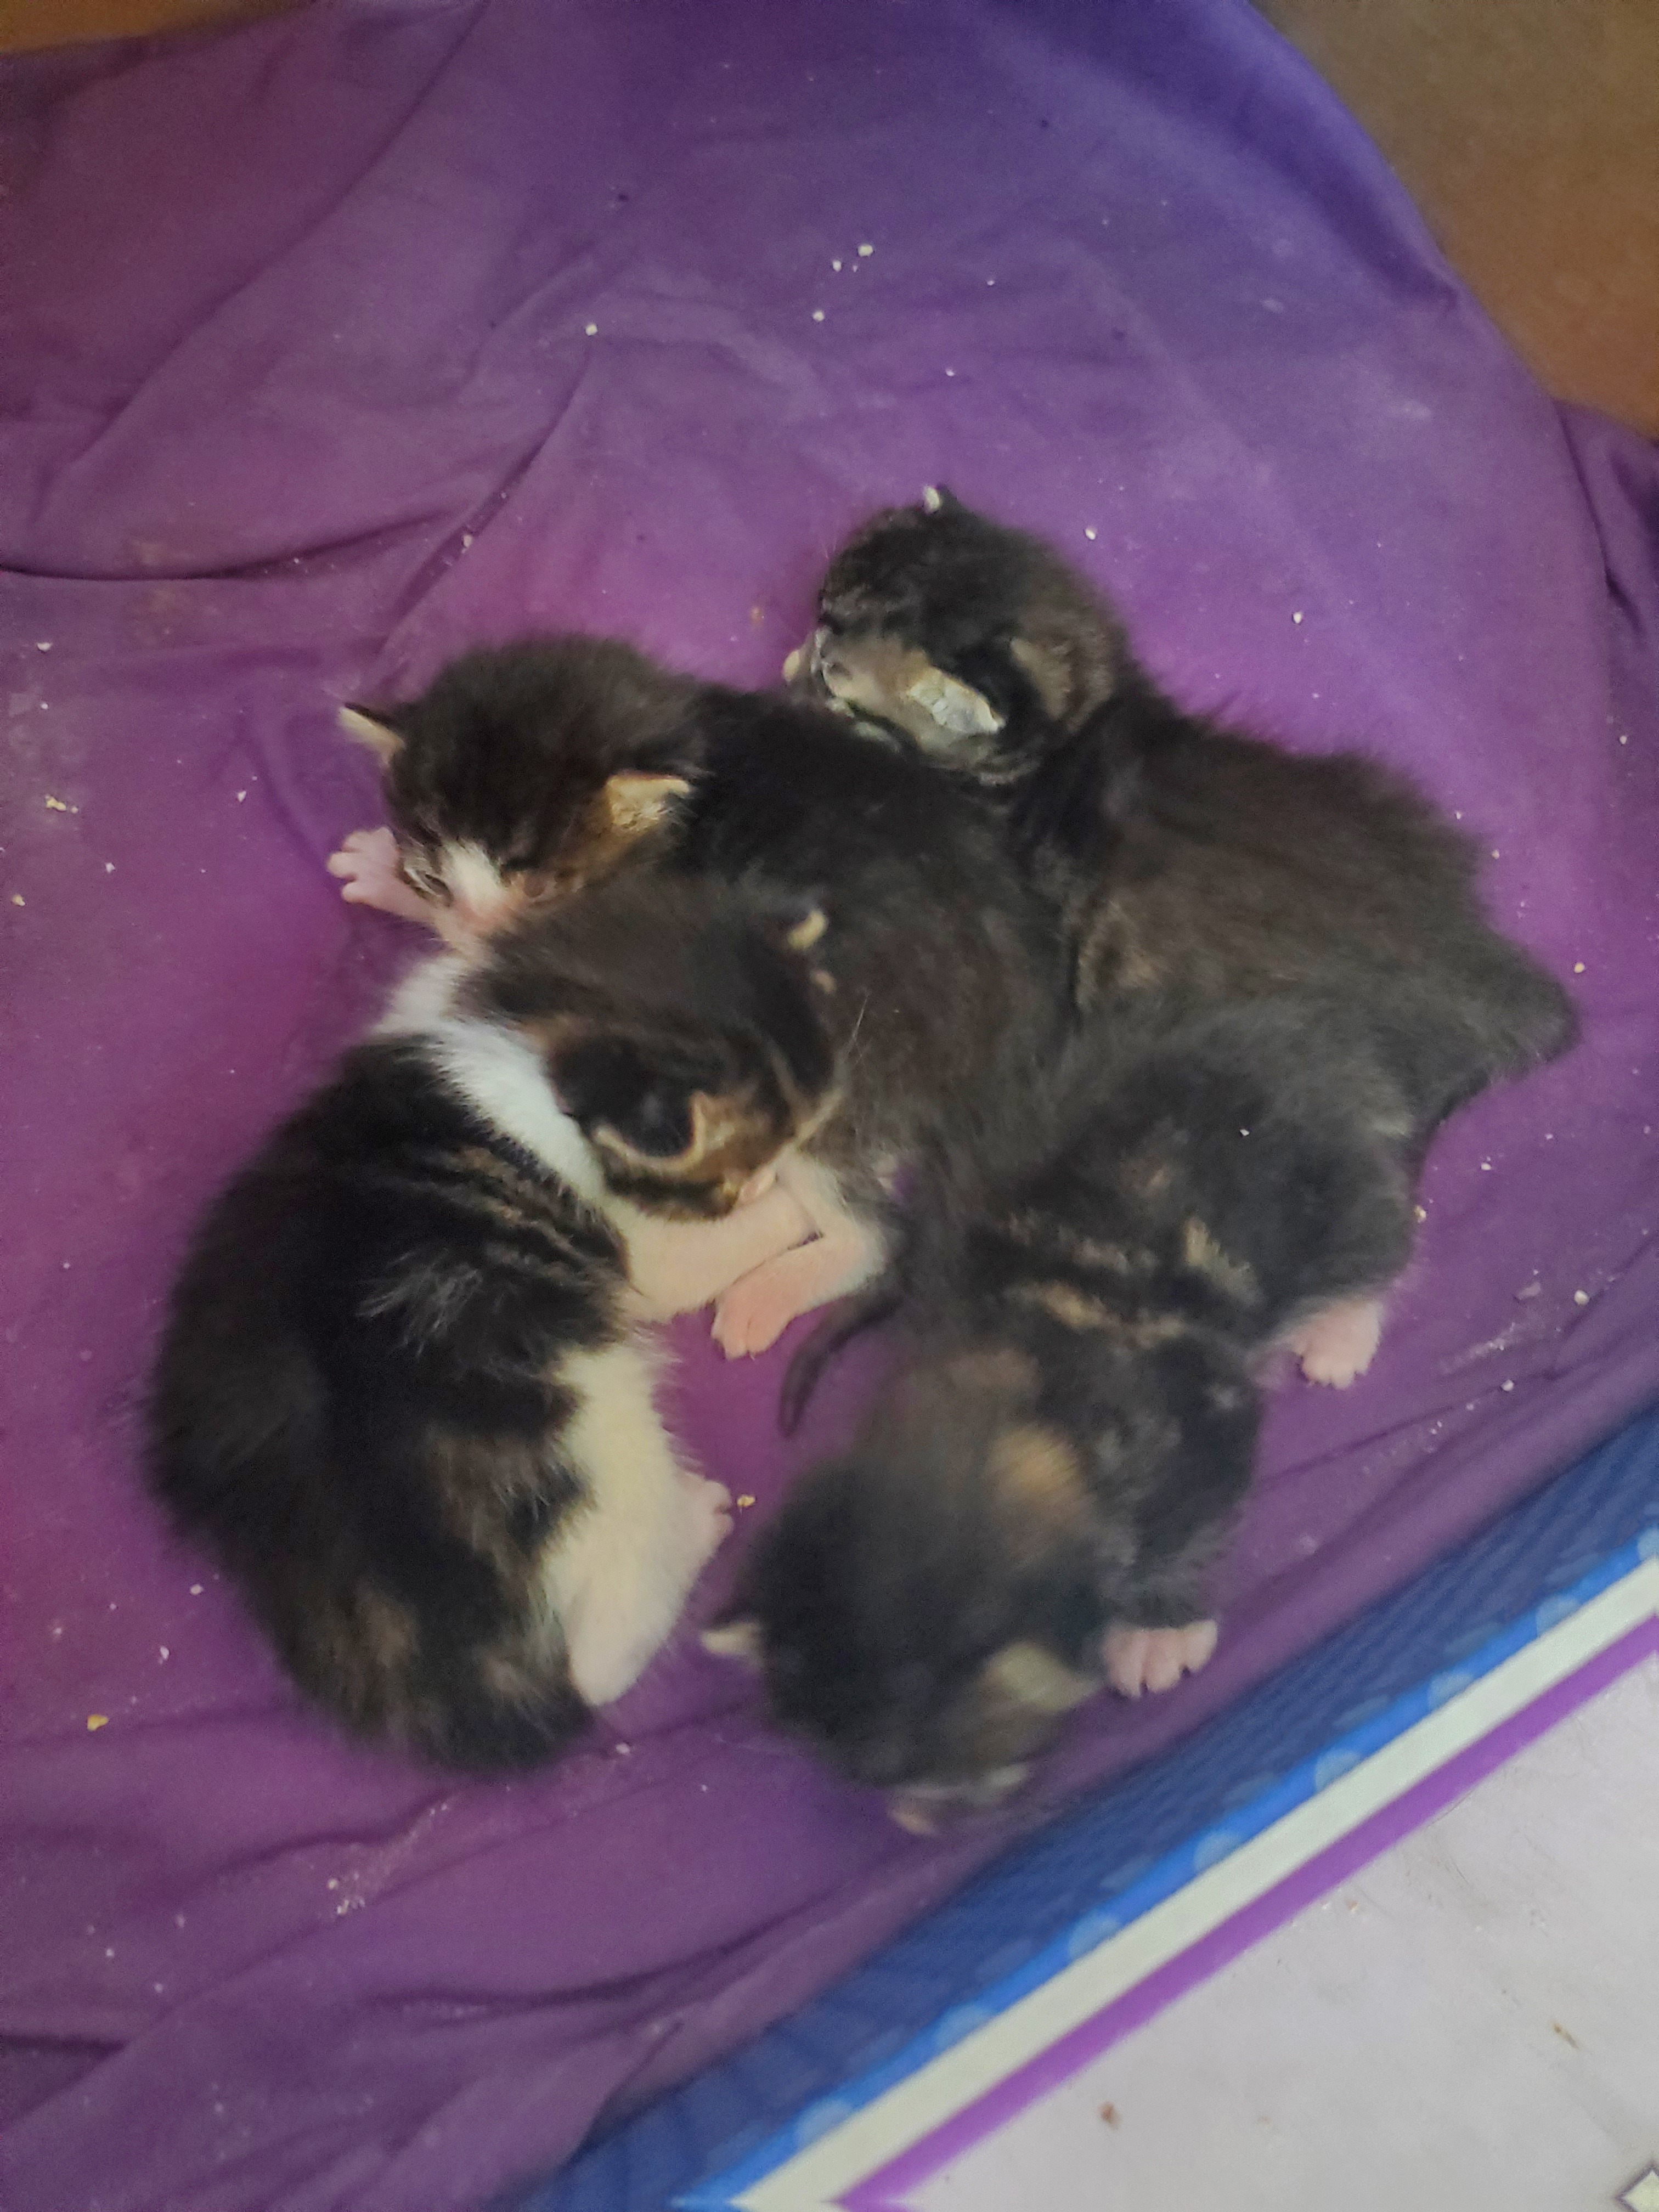 My current foster babies, 2 weeks old